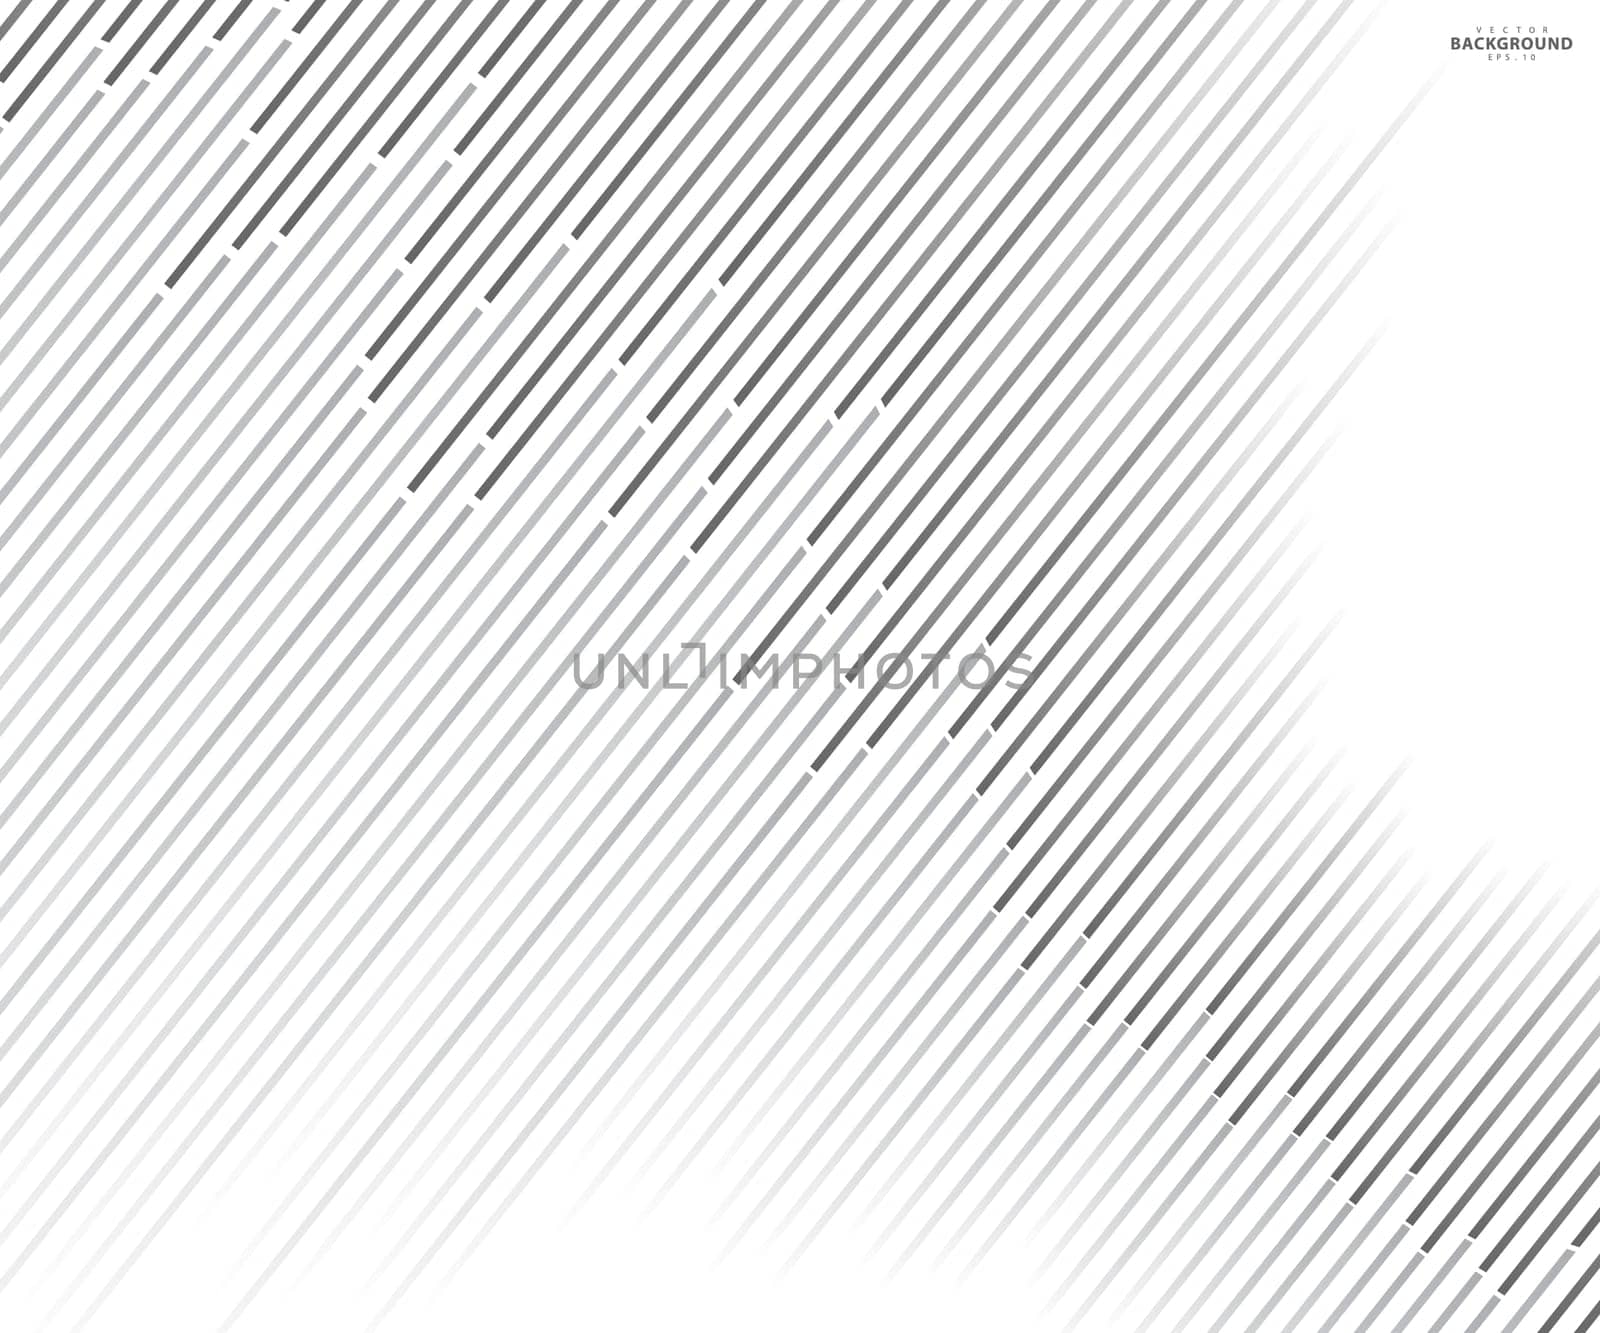 Abstract warped Diagonal Striped Background. Vector curved twisted slanting, waved lines texture. Brand new style for your business design. by Rodseng